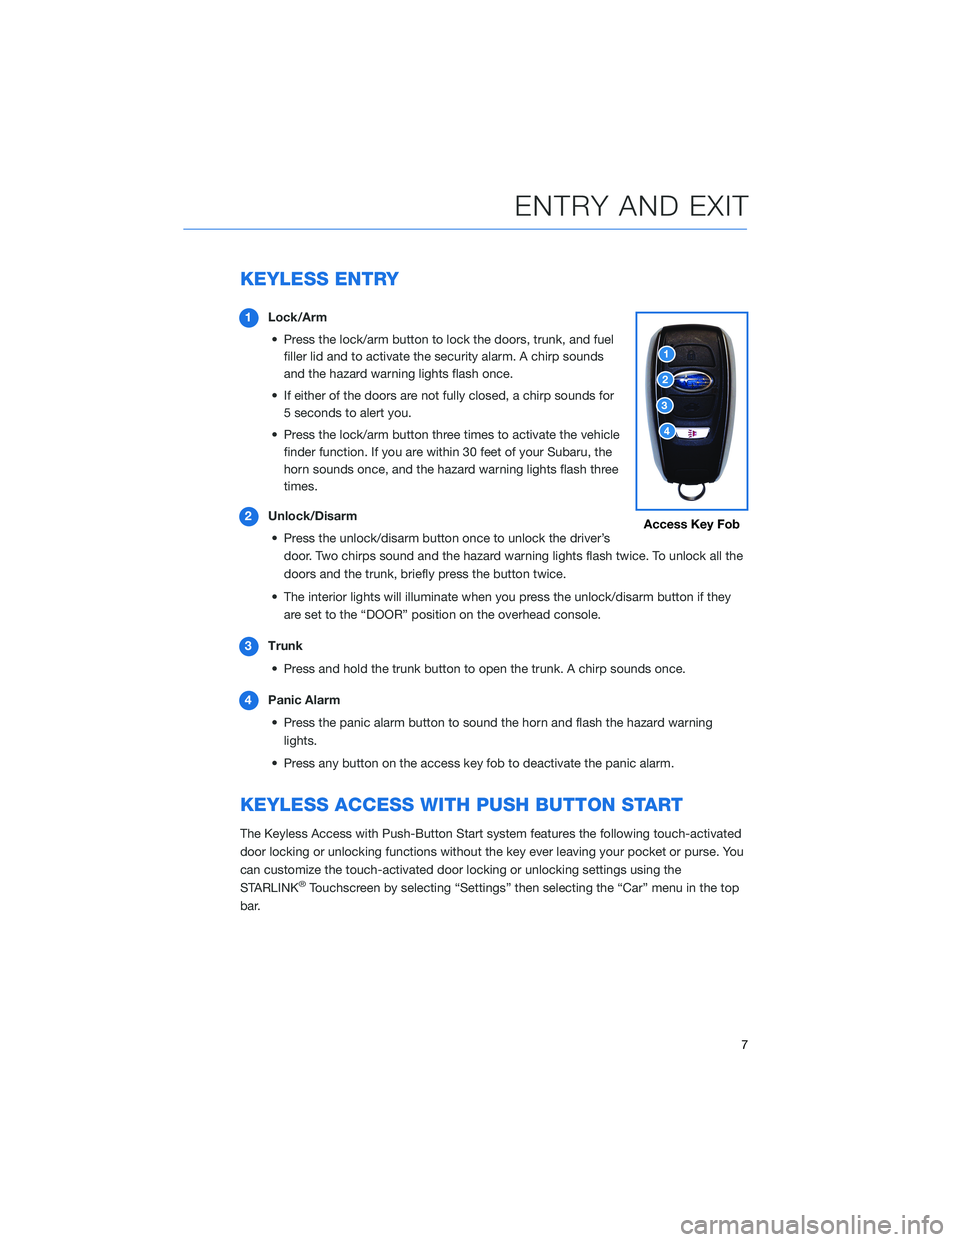 SUBARU BRZ 2022  Getting Started Guide KEYLESS ENTRY
1Lock/Arm
• Press the lock/arm button to lock the doors, trunk, and fuel
filler lid and to activate the security alarm. A chirp sounds
and the hazard warning lights flash once.
• If 